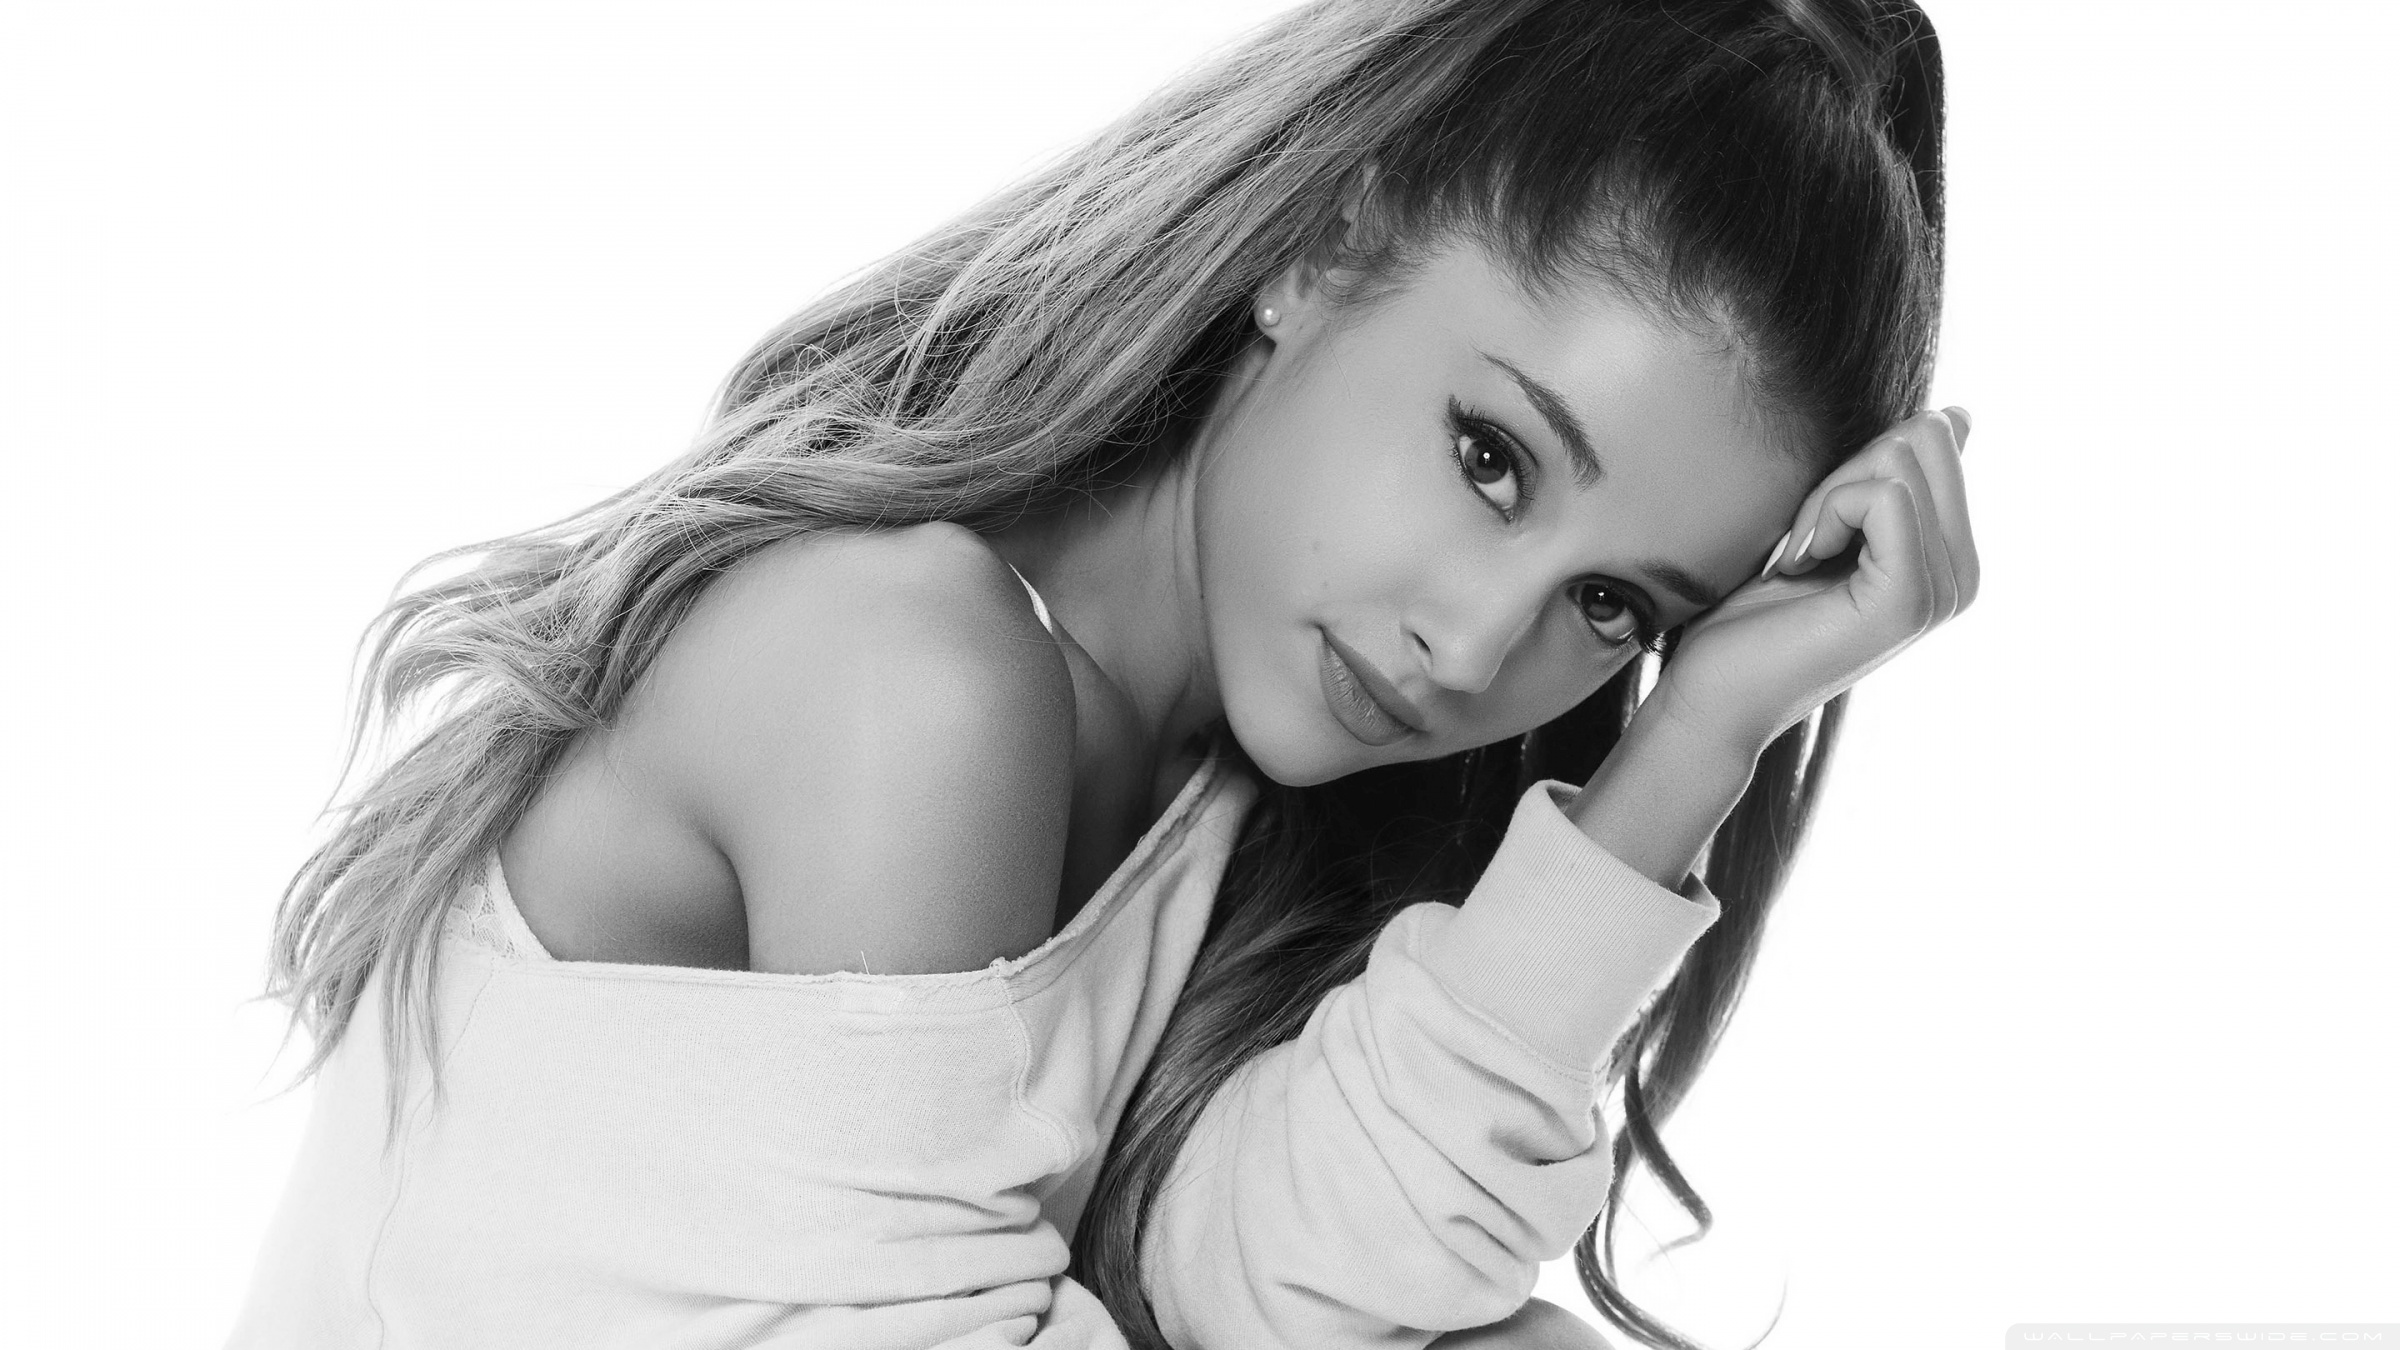  Ariana Grande Aesthetic Wallpapers Photos Pictures WhatsApp Status DP  Free Download